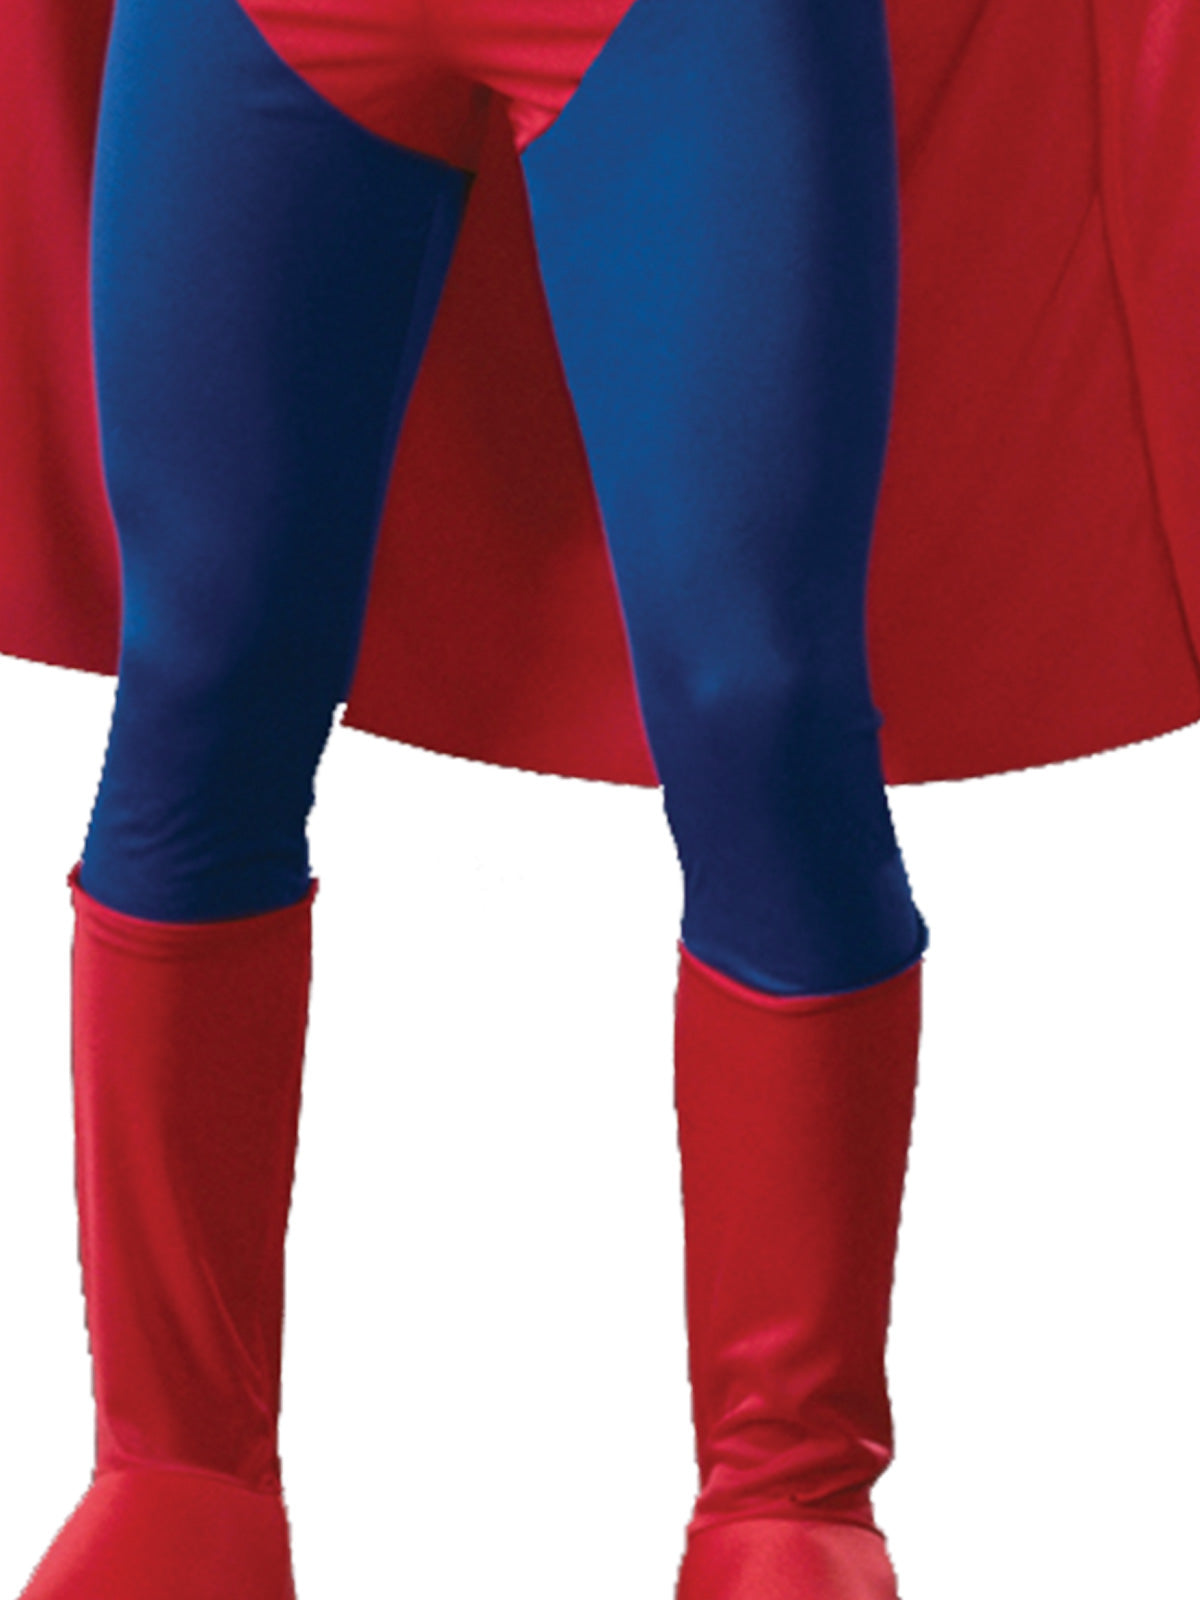 Rubies: Deluxe Muscle Chest Superman Costume